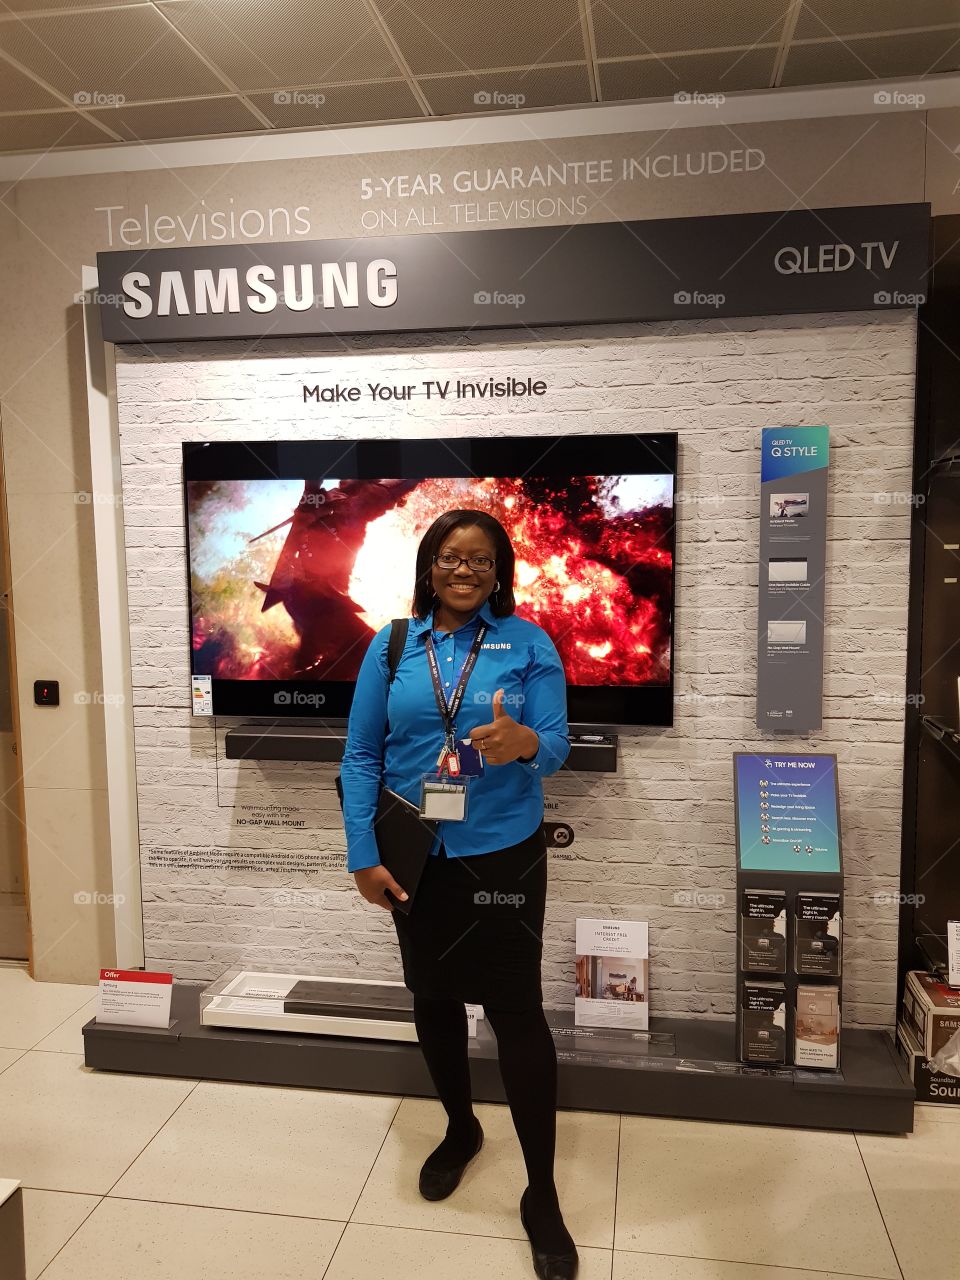 Samsung field force posing in front of the Samsung wall mounted QLED television with soundbar and one connect box with fibre optic cable